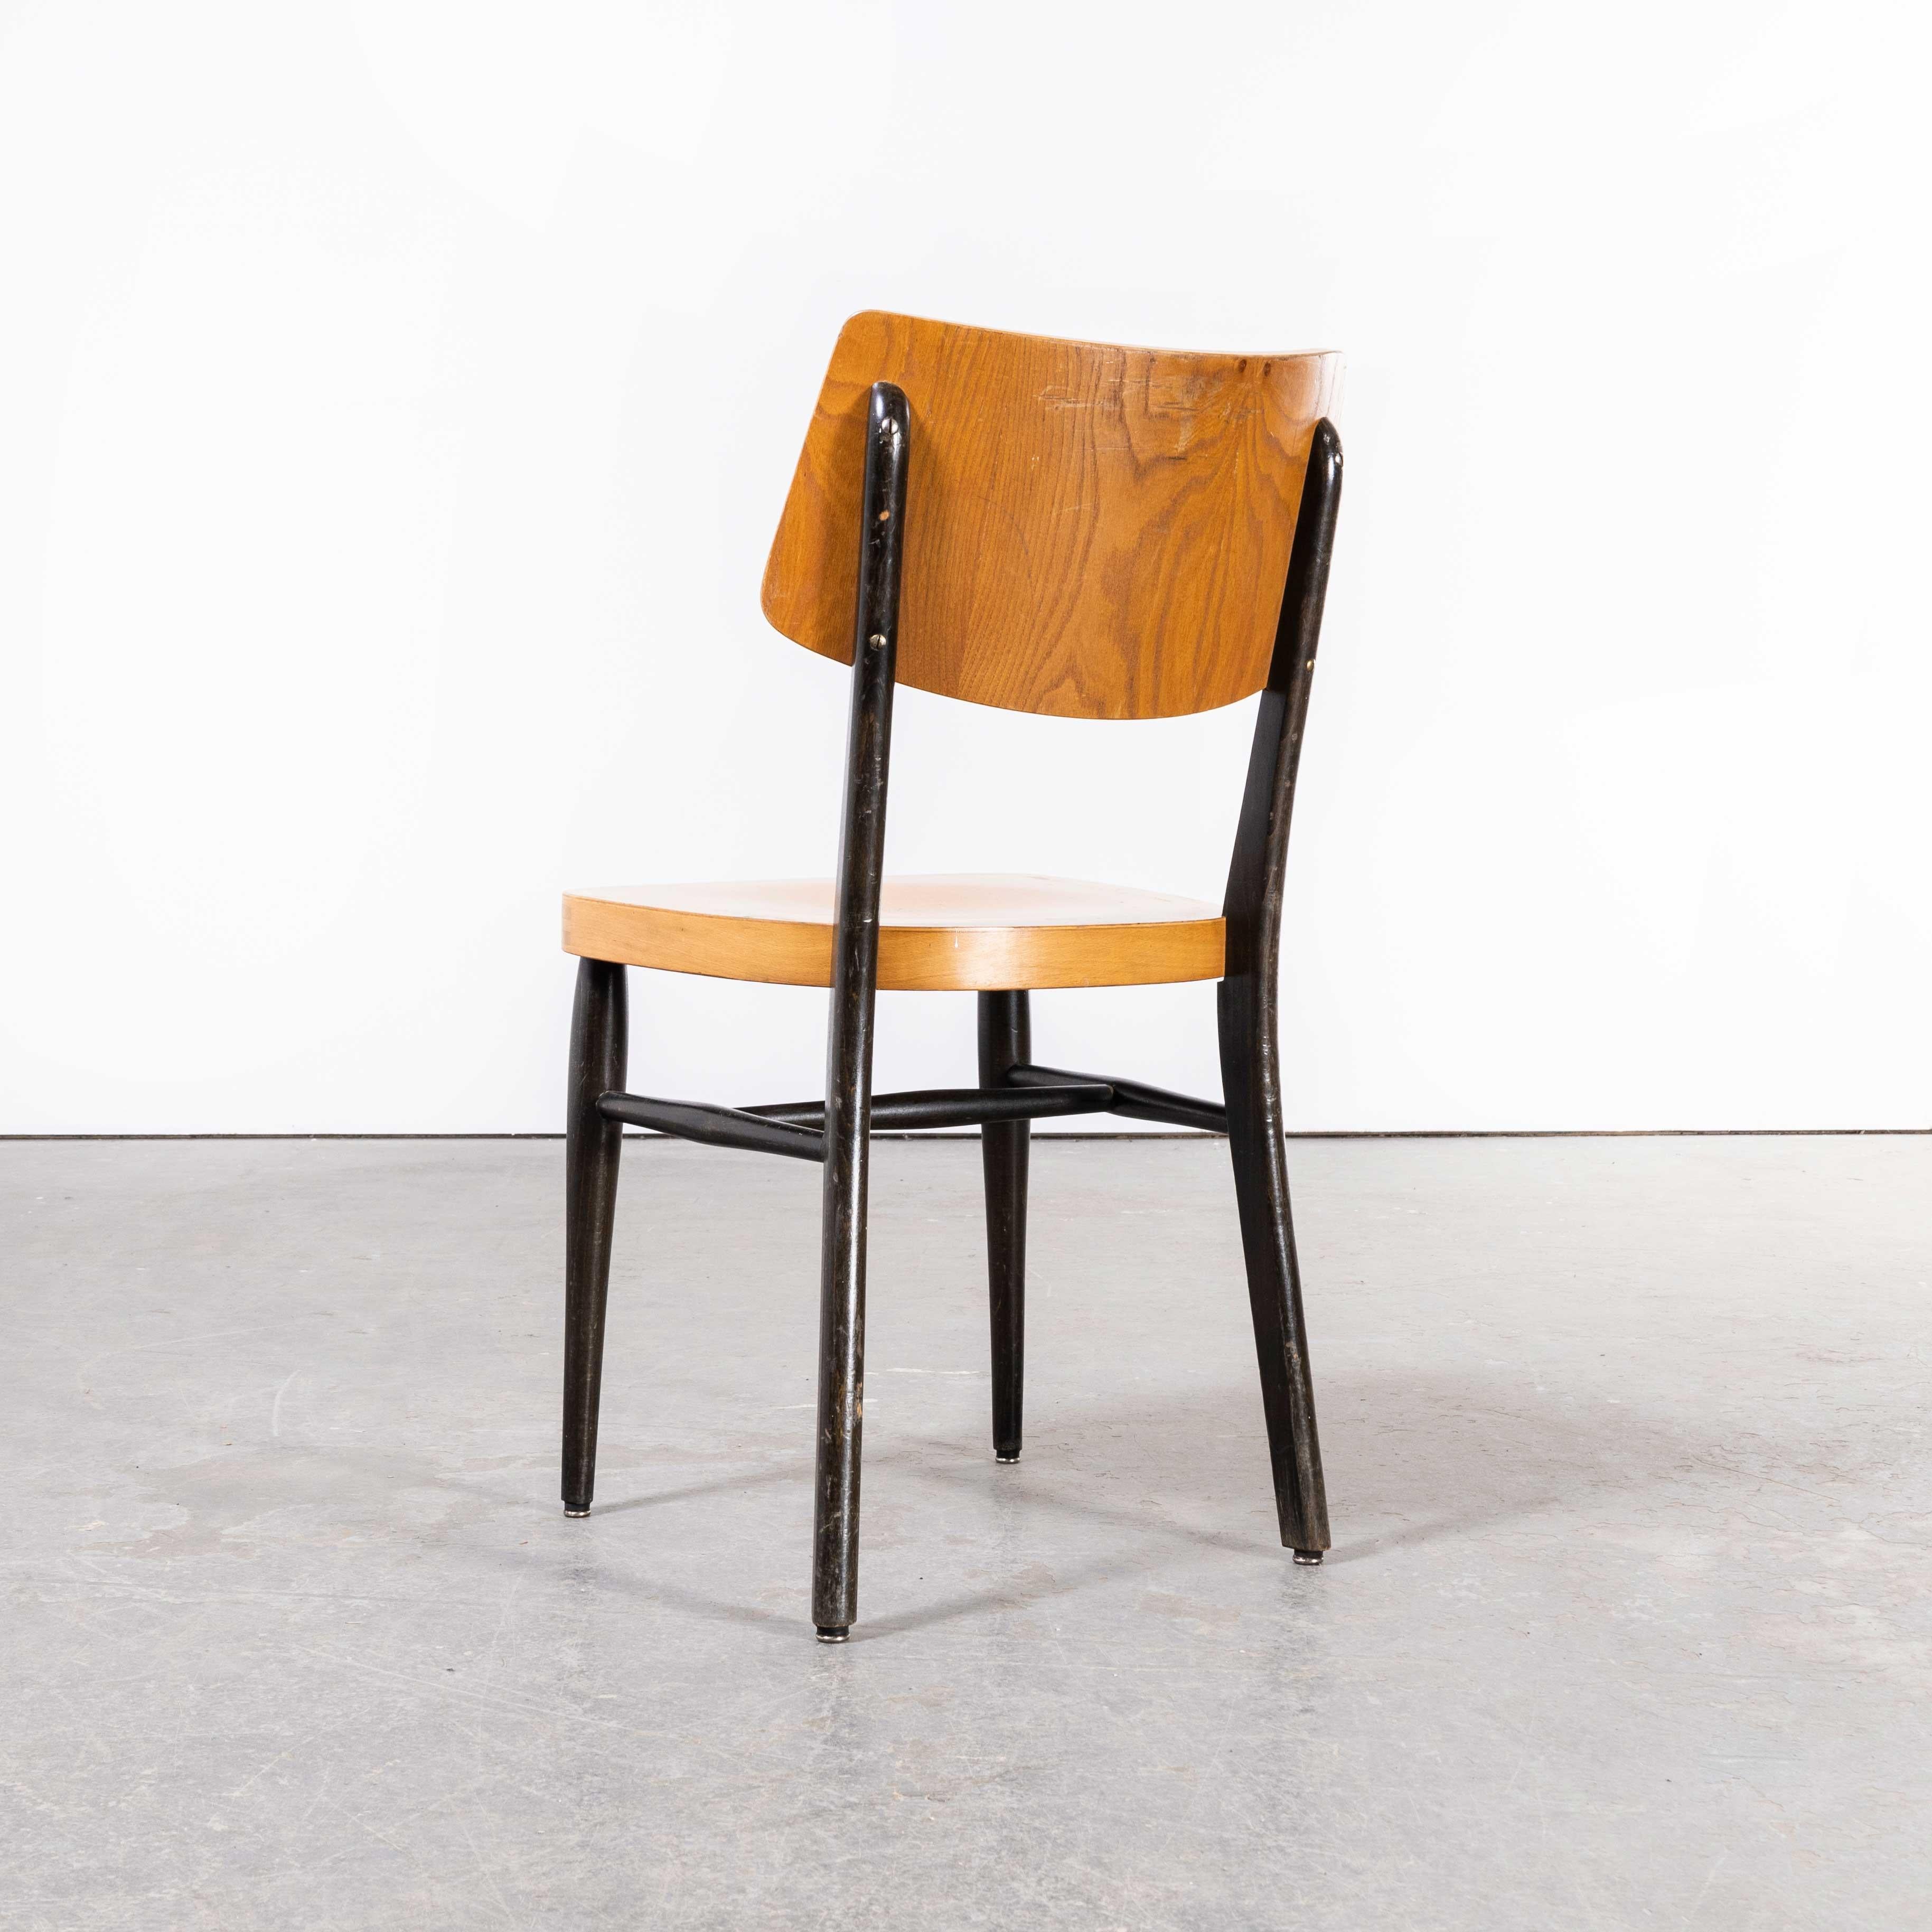 German 1970s Two Tone Saddle Back Dining Chair, Set of Four For Sale